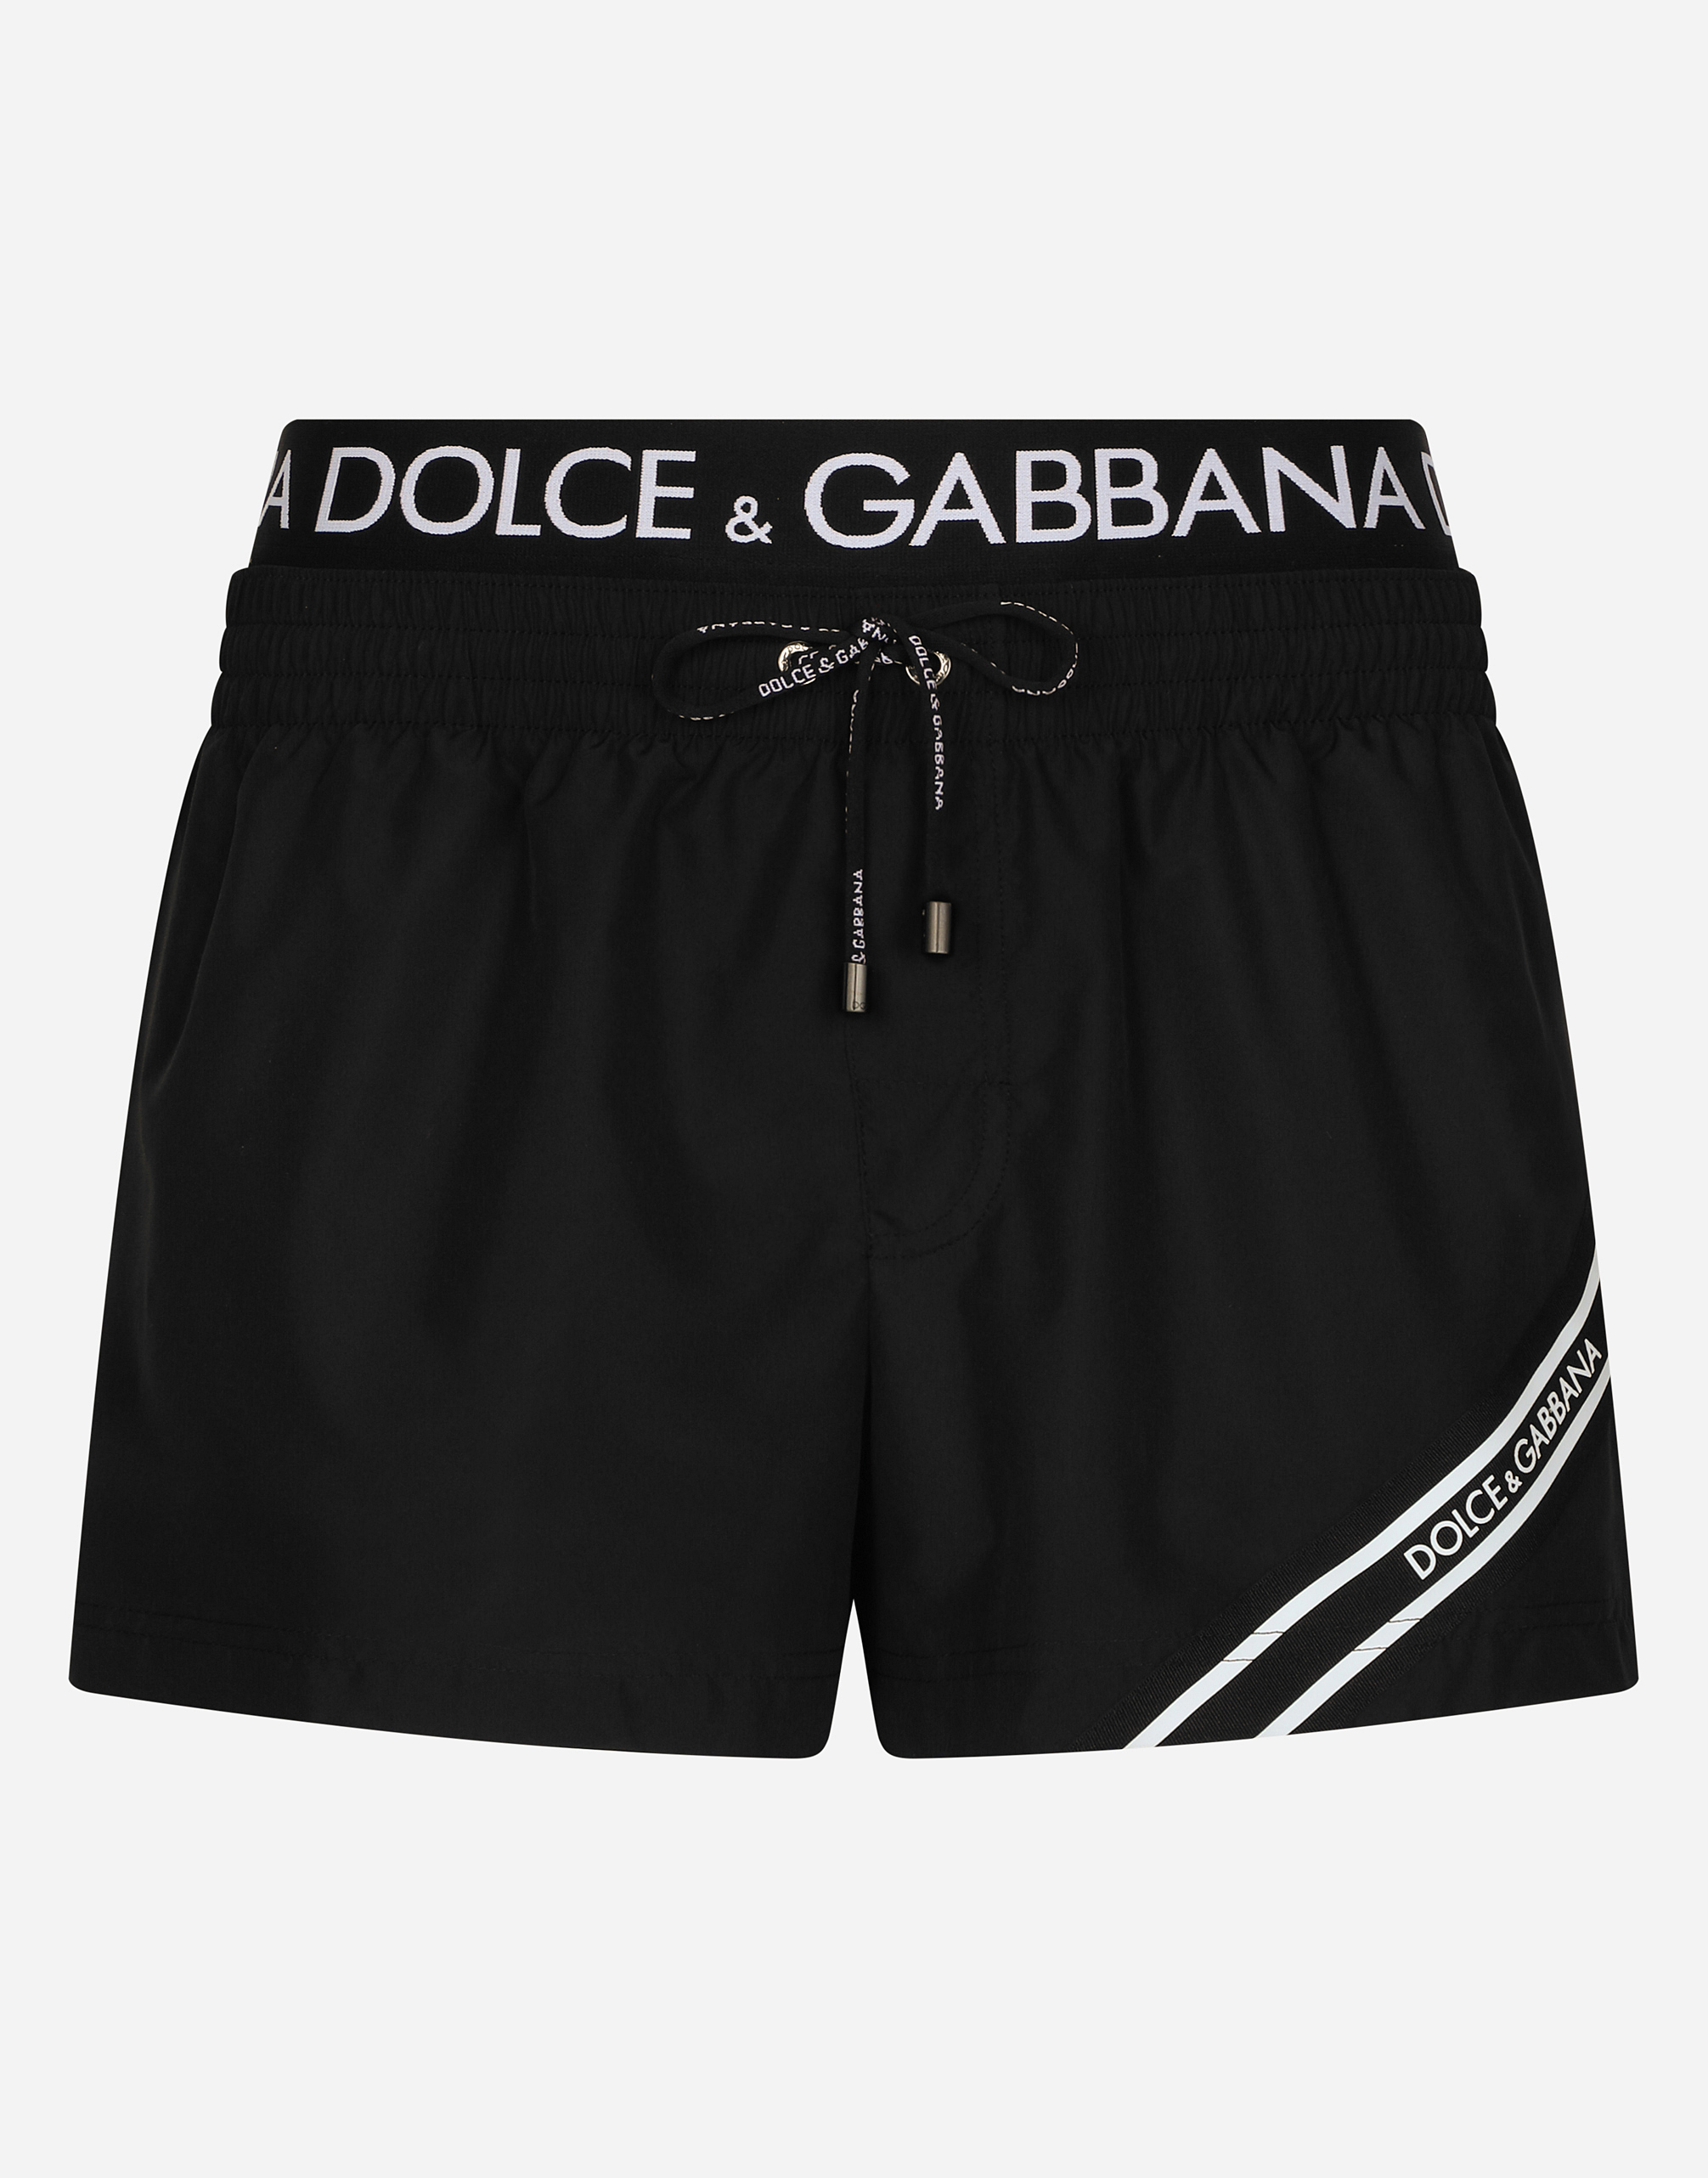 Short swim trunks with branded band in Black